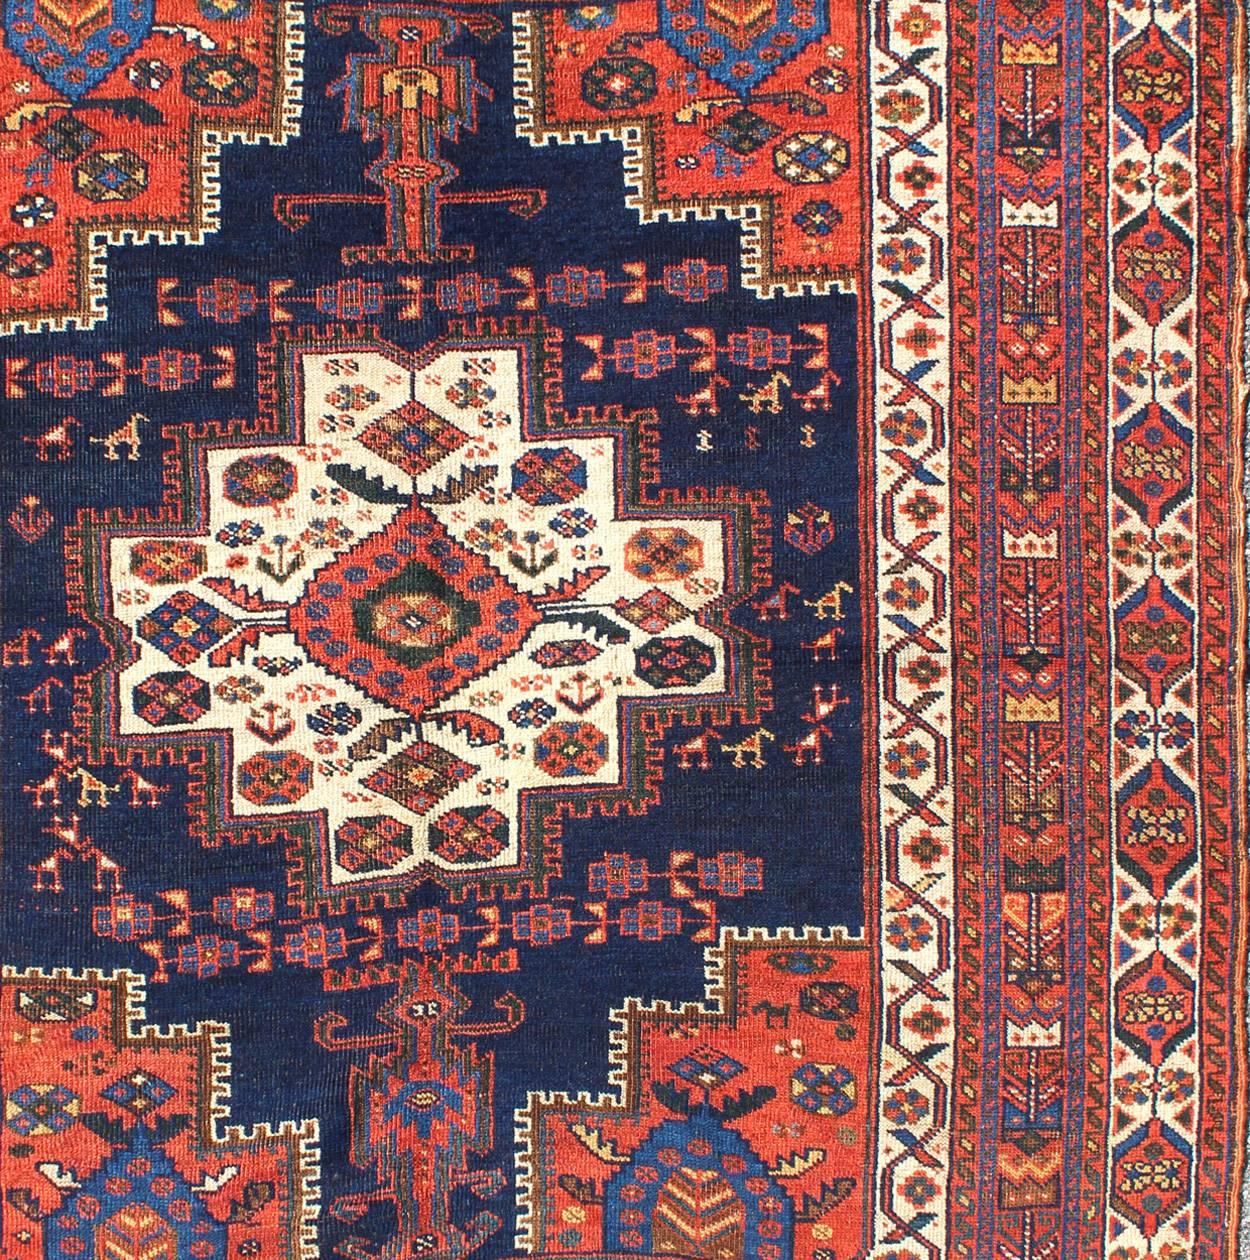 Hand-Knotted Antique Persian Afshar Carpet with Stylized Chrysanthemums and Vase Design